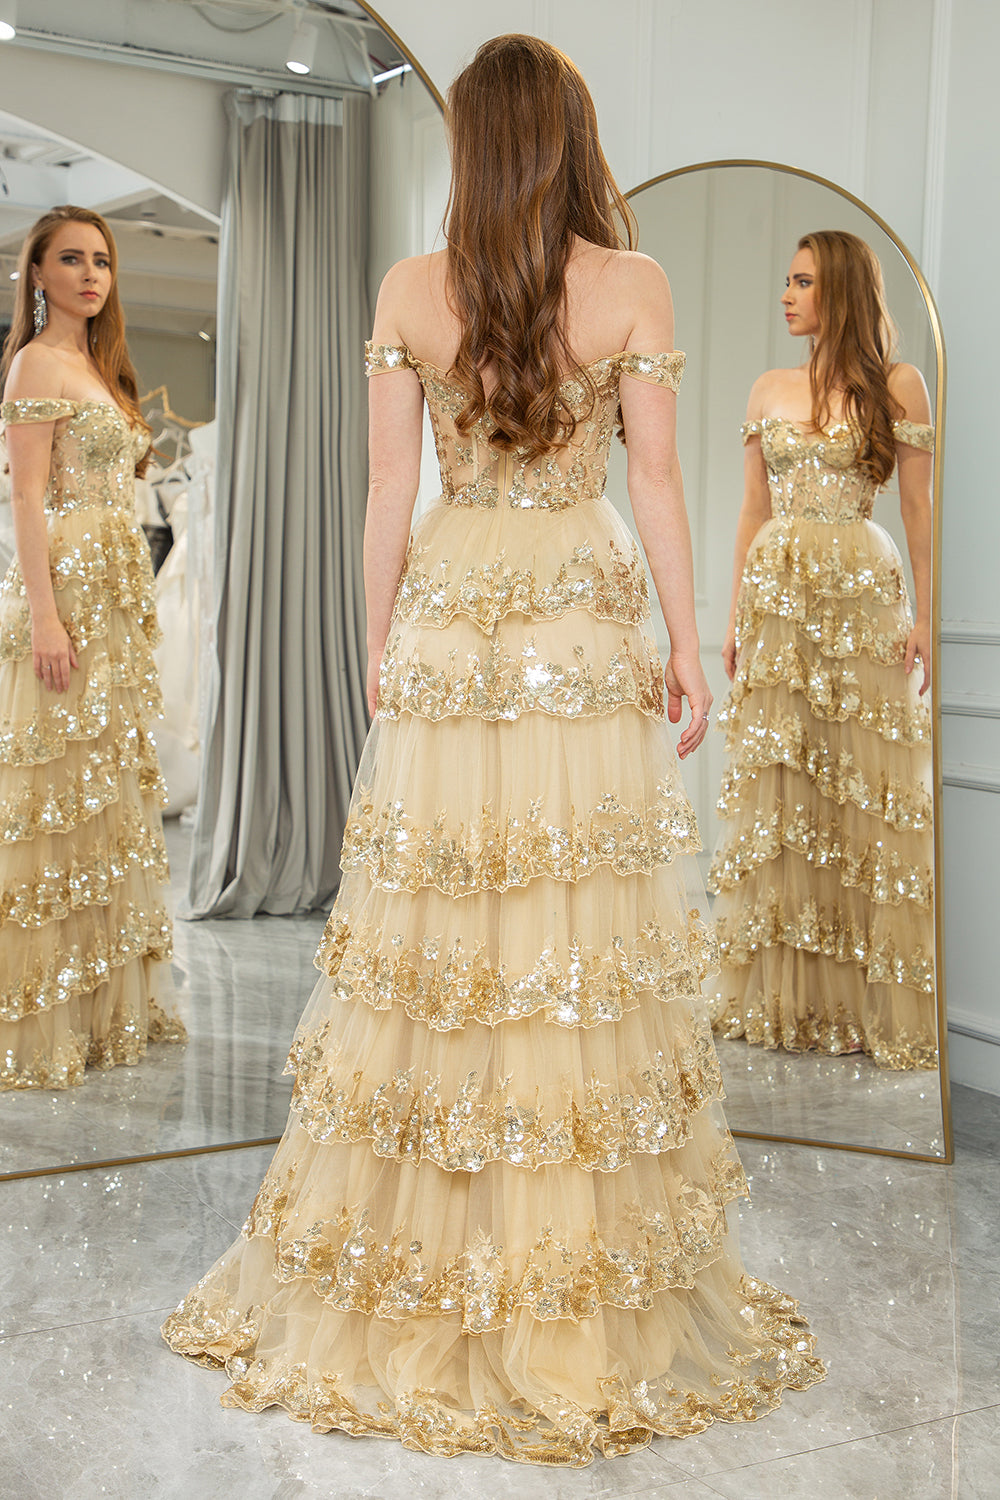 ZLVWB Golden Dresses Lace Appliques Pearls Off The Shoulder Fluffy Evening  Gowns Sweet Party Prom Ball Gowns (Color : Gold, Size : 14code) :  Amazon.com.au: Clothing, Shoes & Accessories